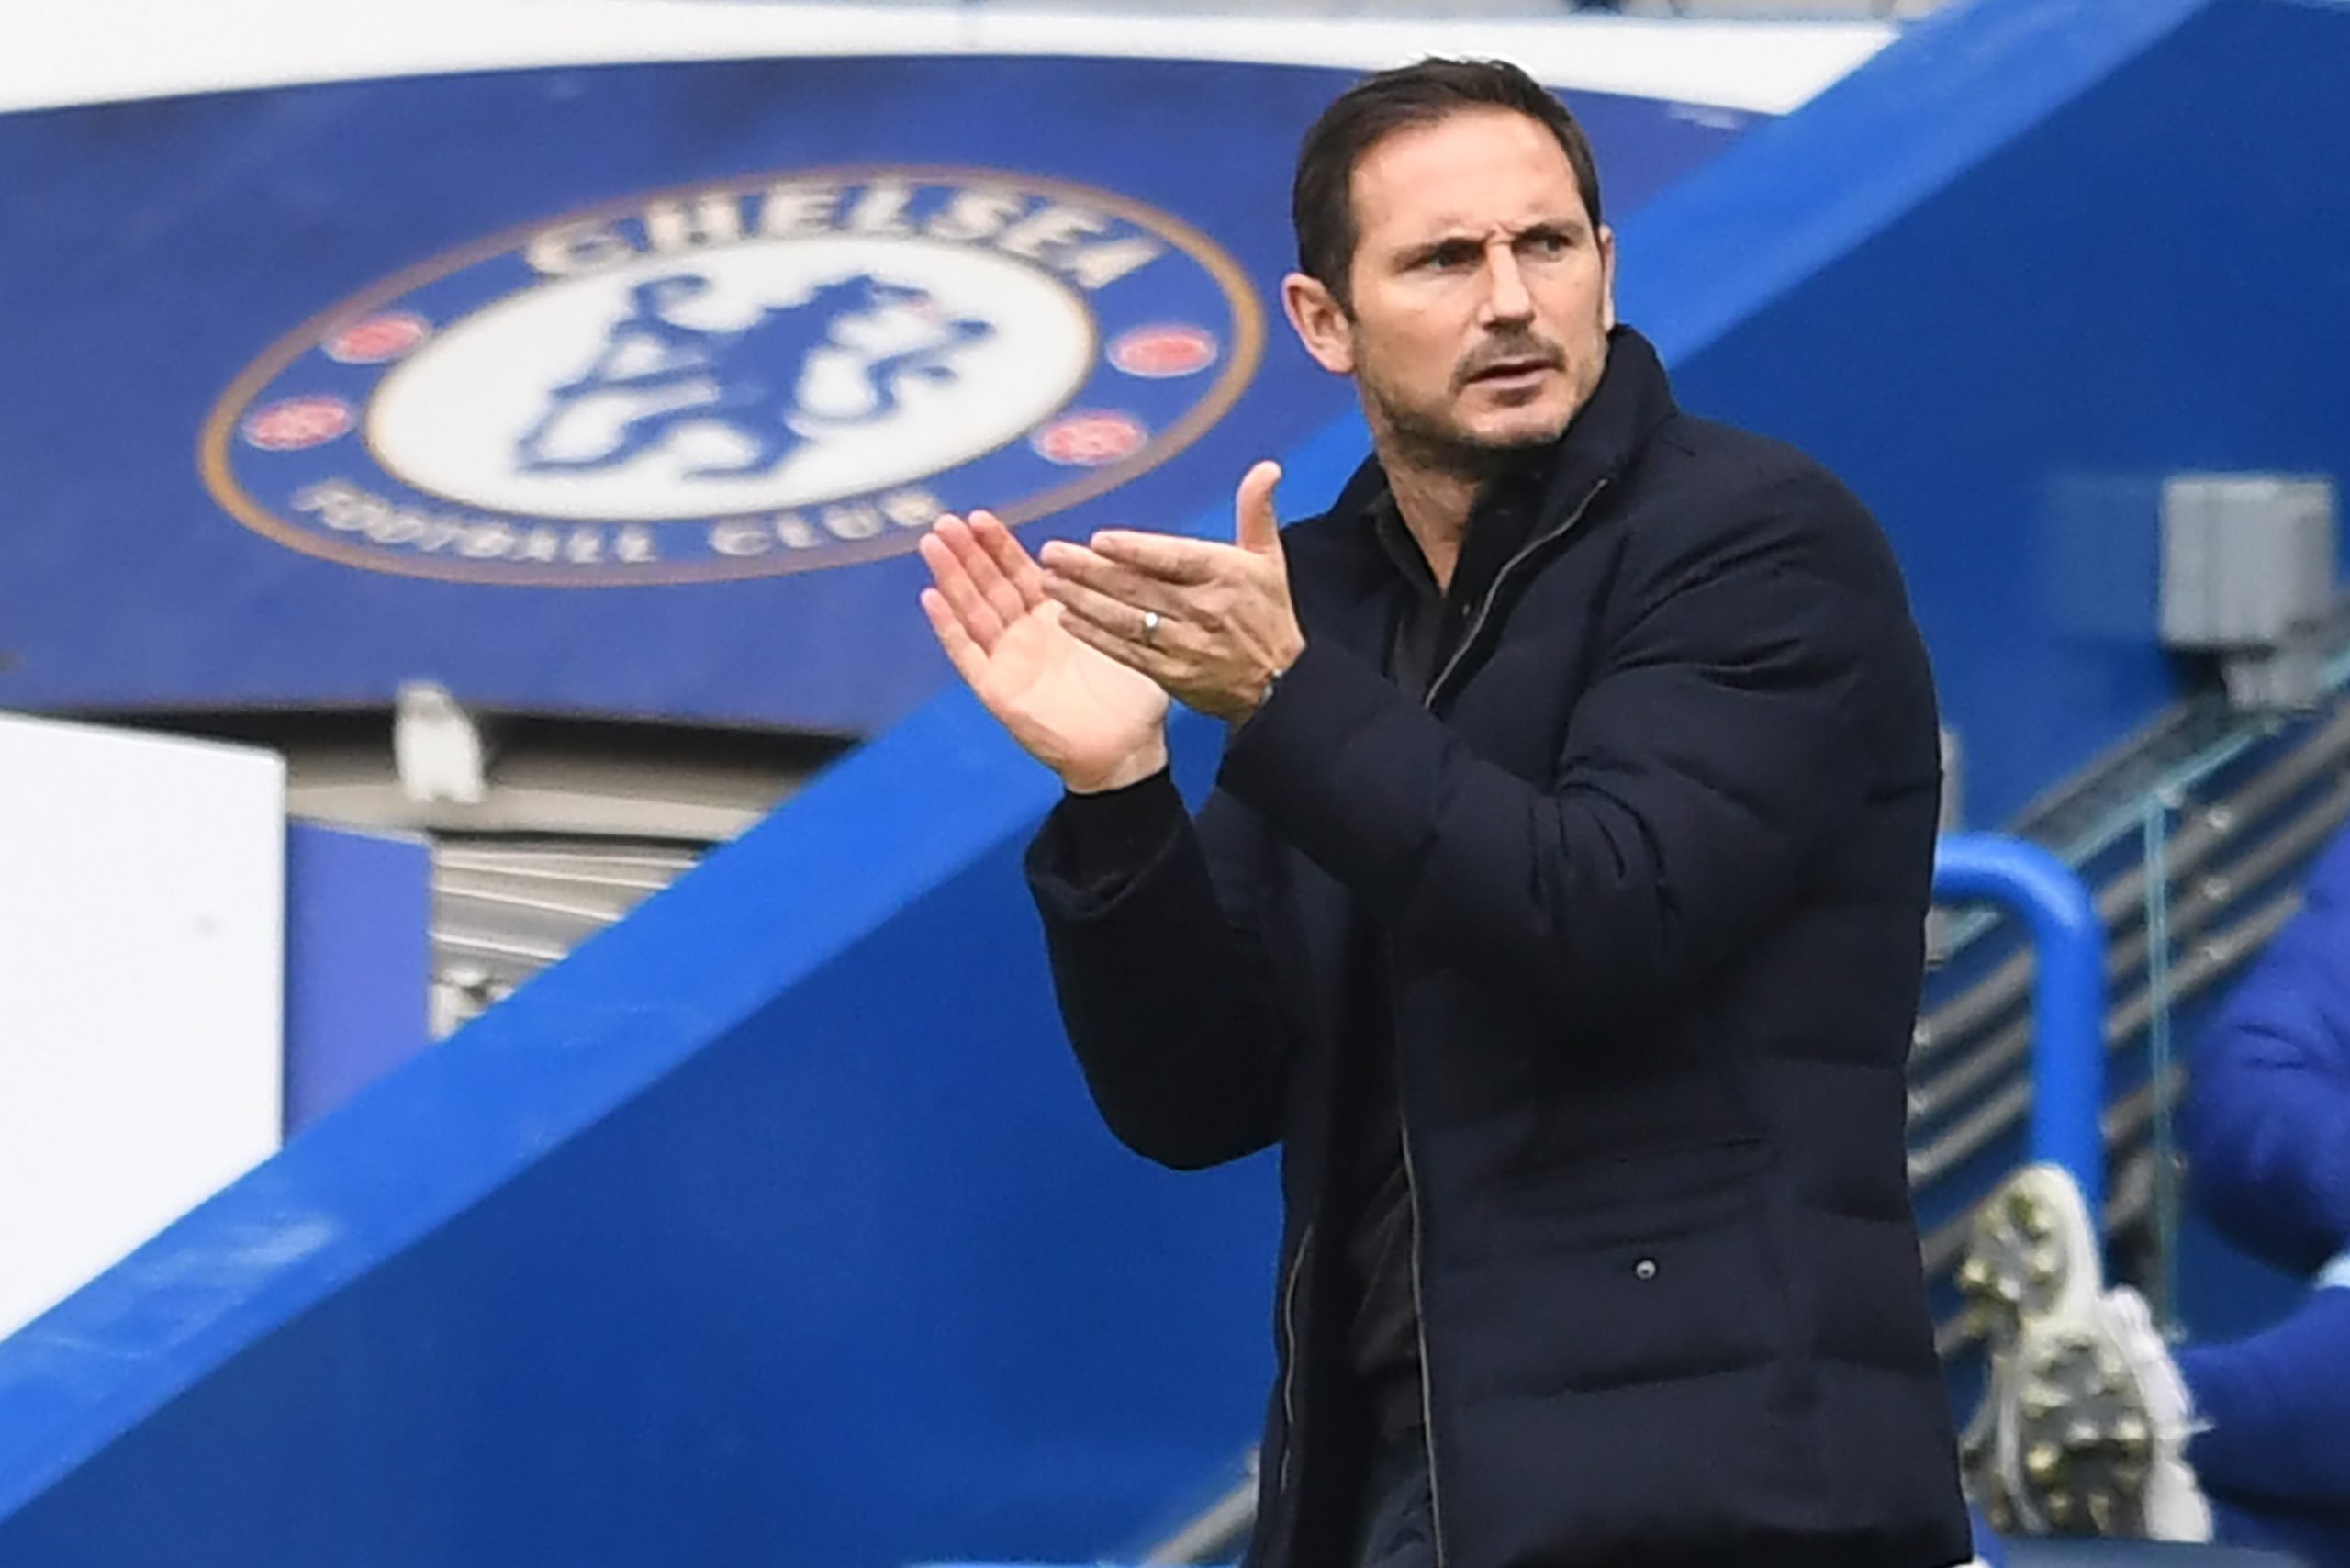 Chelsea's English head coach Frank Lampard gestures during the English Premier League football match between Chelsea and Crystal Palace at Stamford Bridge in London on October 3, 2020. (Photo by NEIL HALL / AFP)